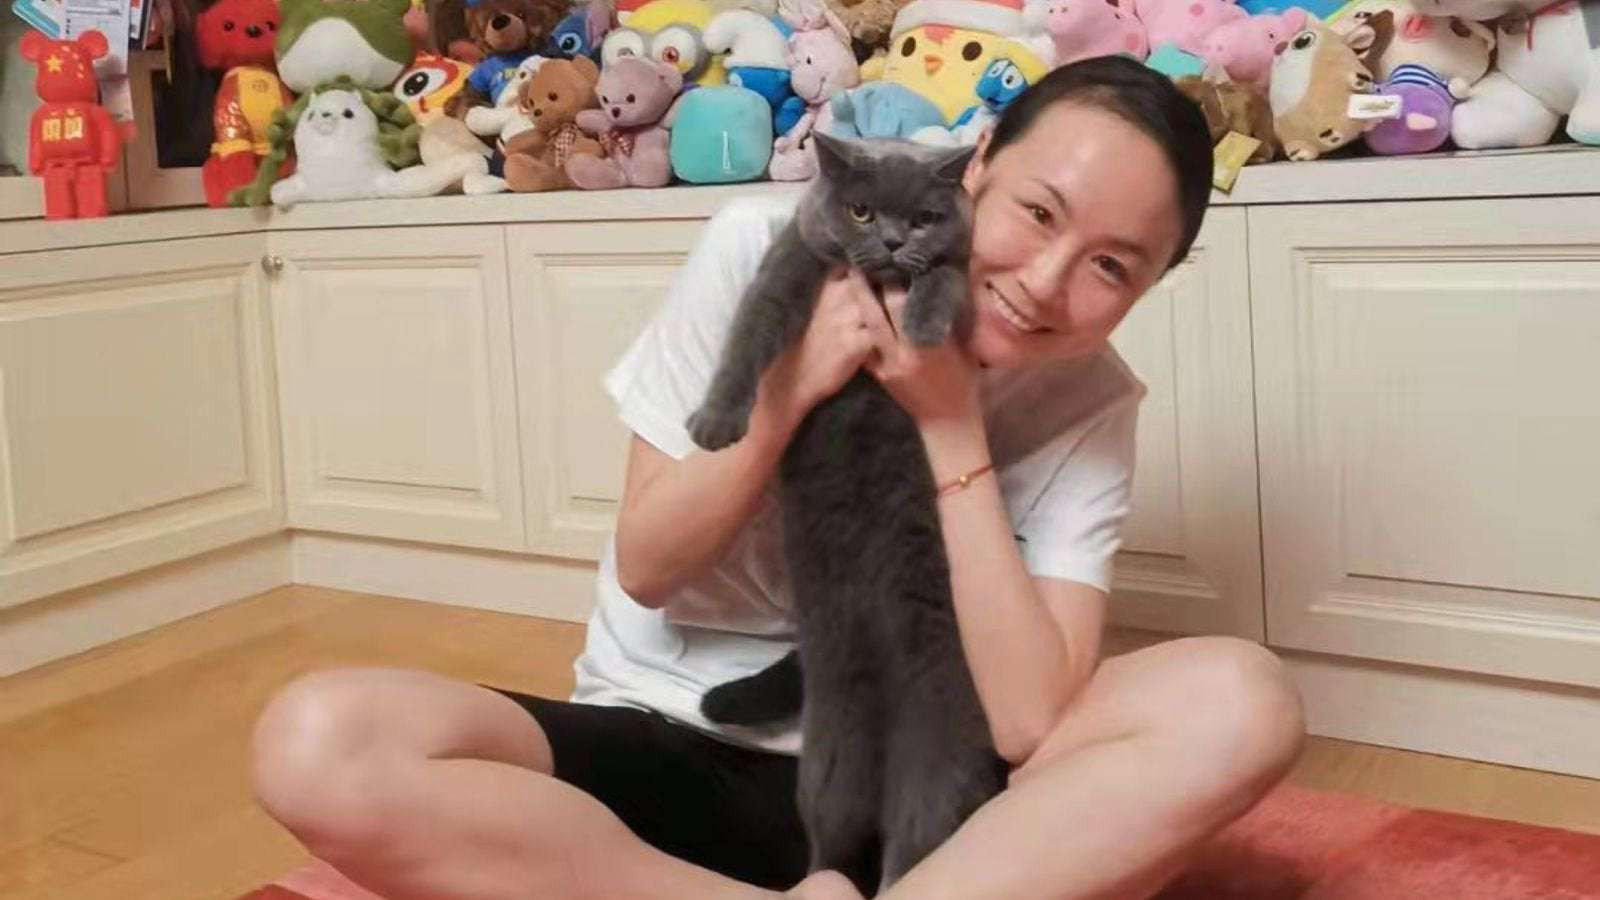 image for Peng Shuai: Missing Chinese tennis player will make public appearance 'soon', says state media